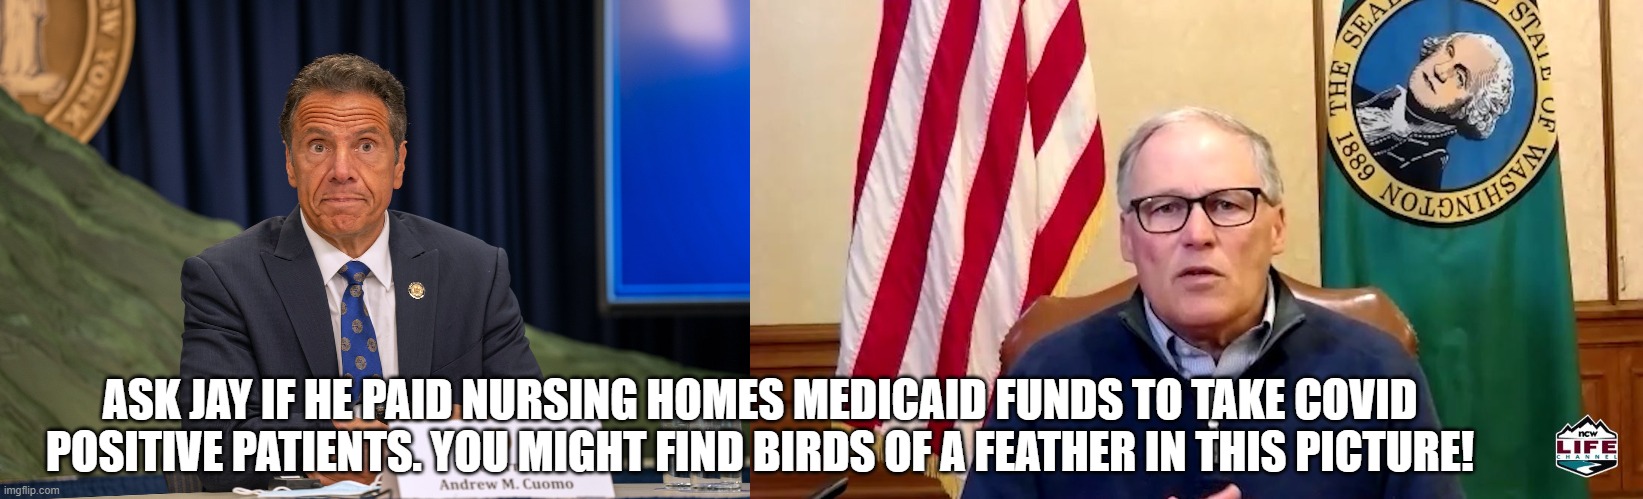 Birds of a feather? | ASK JAY IF HE PAID NURSING HOMES MEDICAID FUNDS TO TAKE COVID POSITIVE PATIENTS. YOU MIGHT FIND BIRDS OF A FEATHER IN THIS PICTURE! | image tagged in andrew cuomo,washington | made w/ Imgflip meme maker